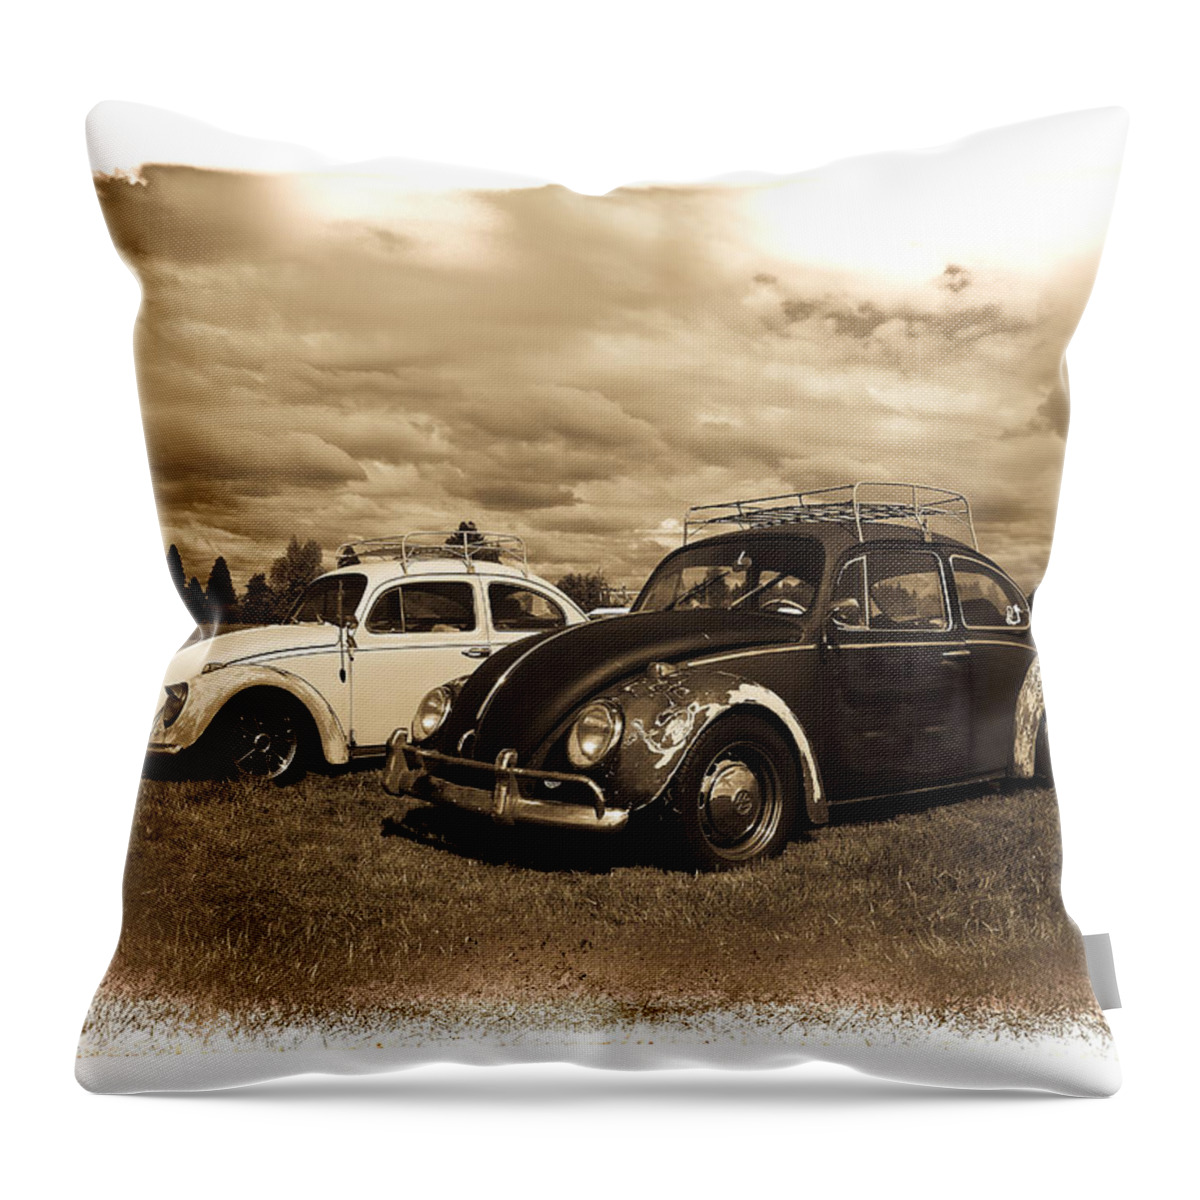 Vw Bug Throw Pillow featuring the photograph Old VW Beetles by Steve McKinzie